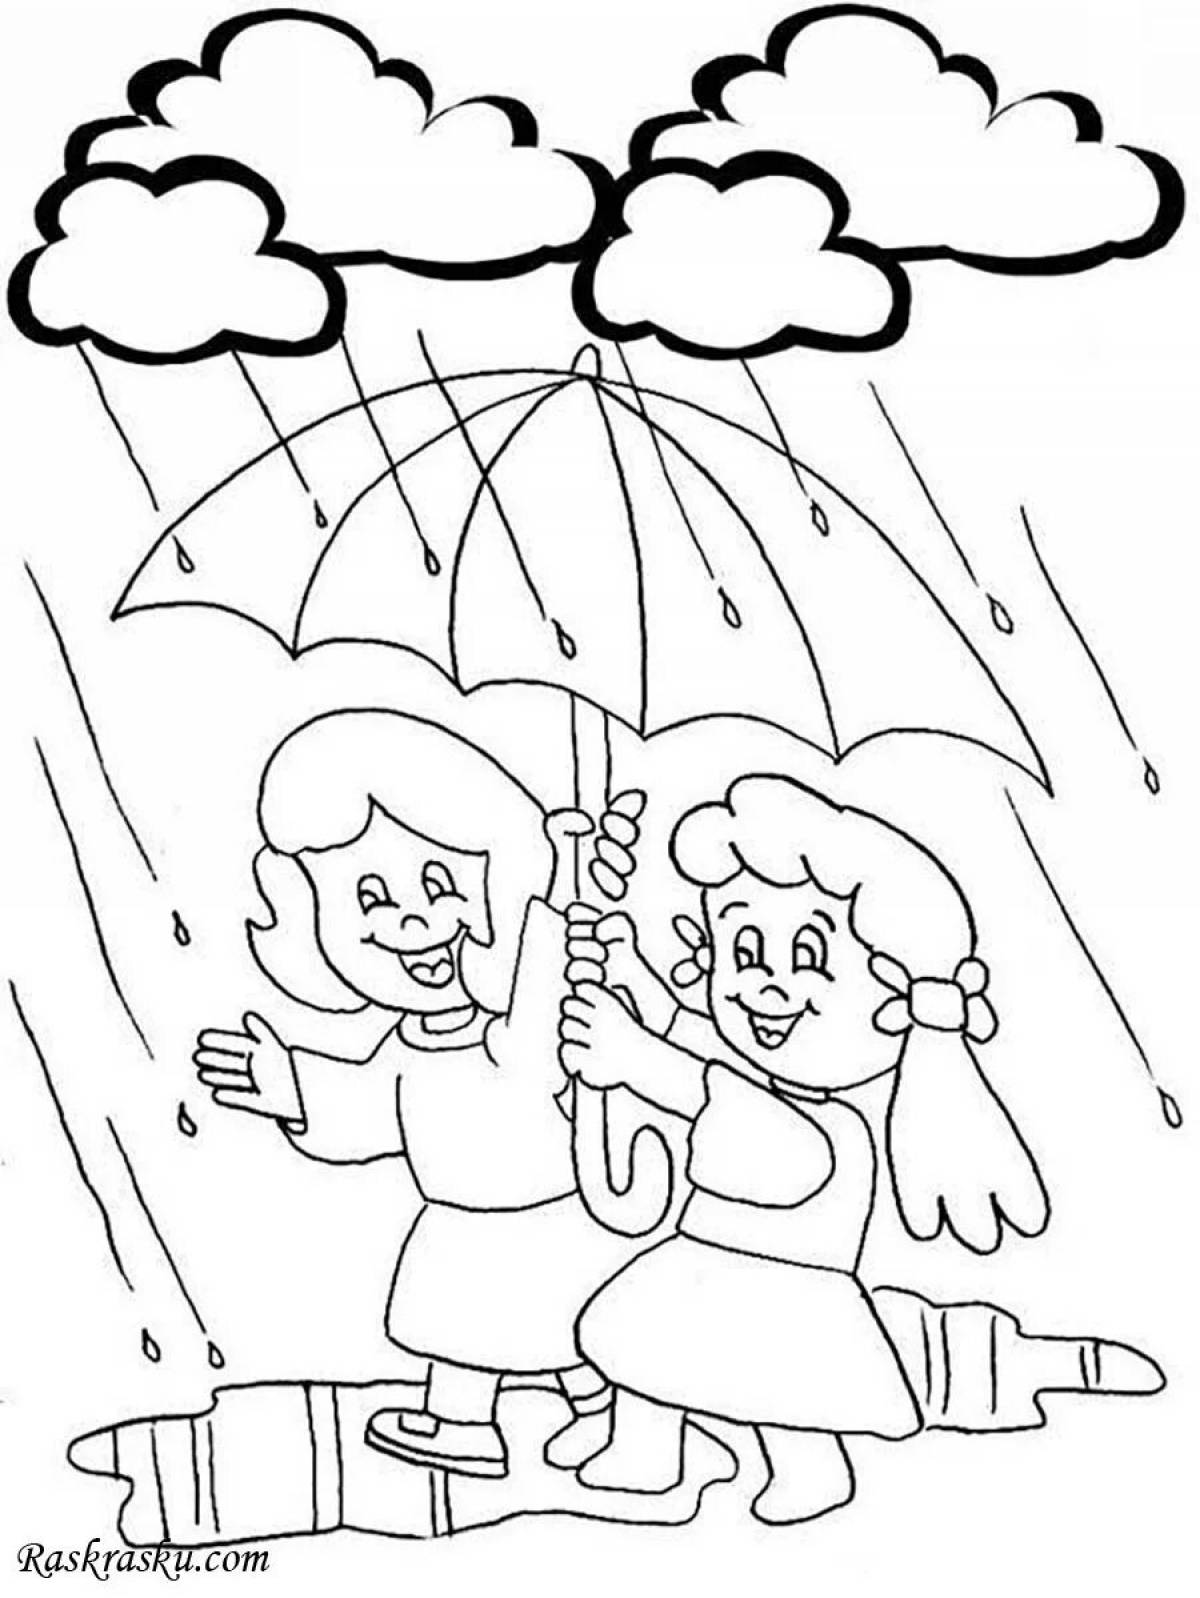 Amazing rain coloring page for kids